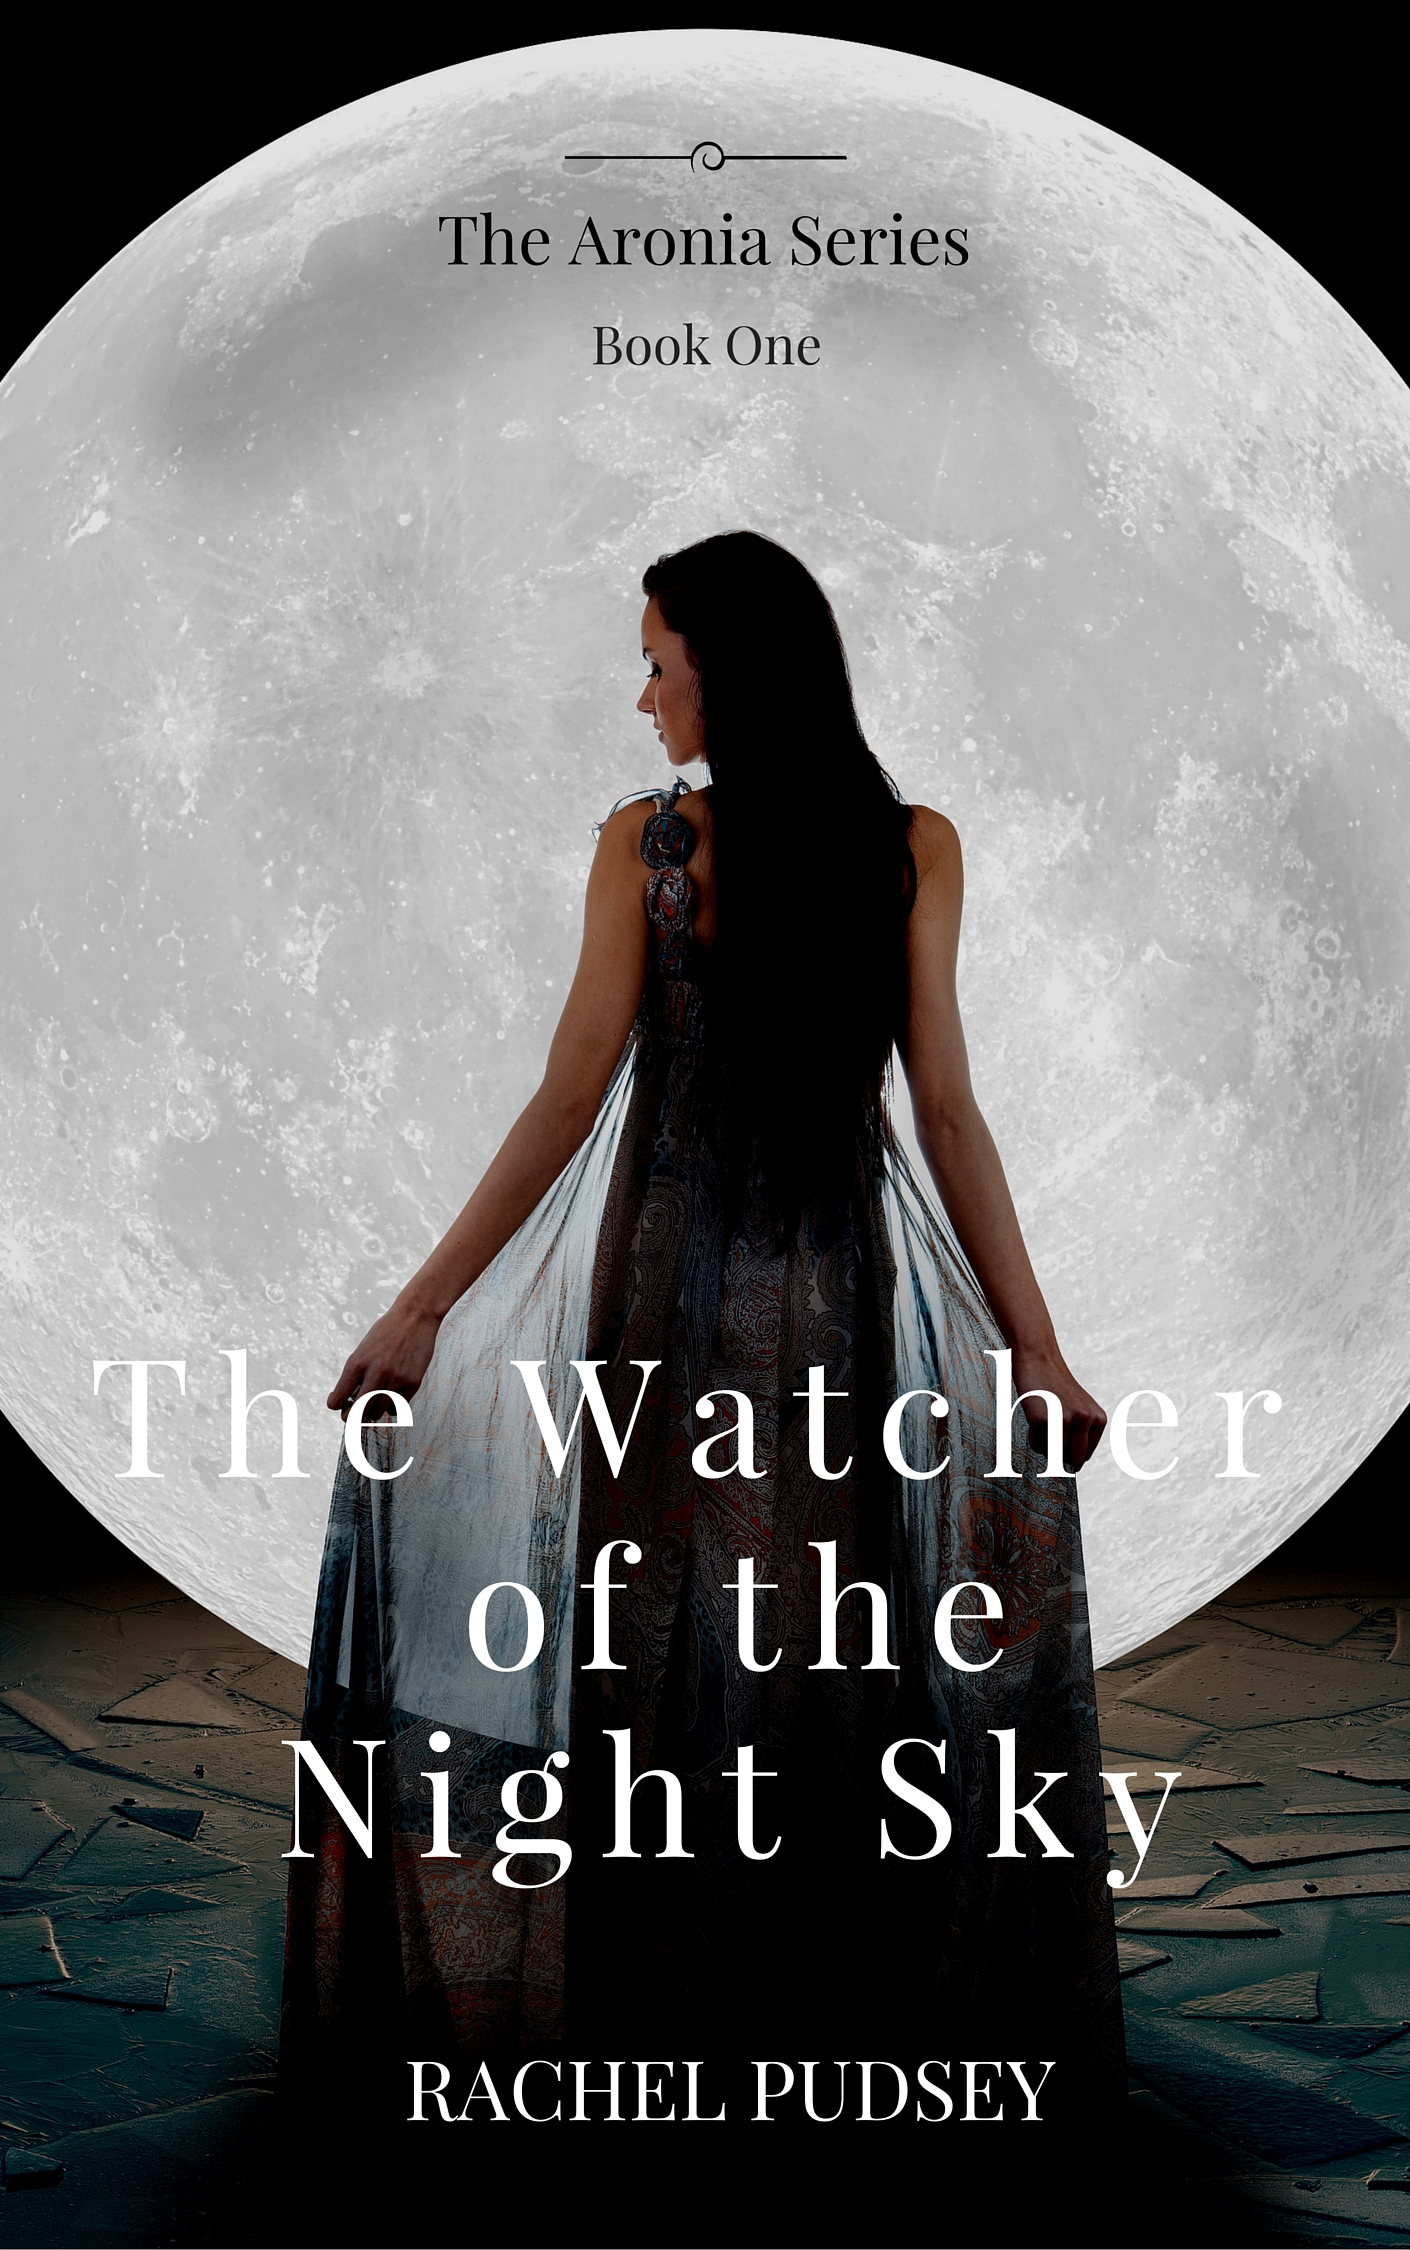 FREE: The Watcher of the Night Sky (Aronia Series #1) by Rachel Pudsey by Rachel Pudsey